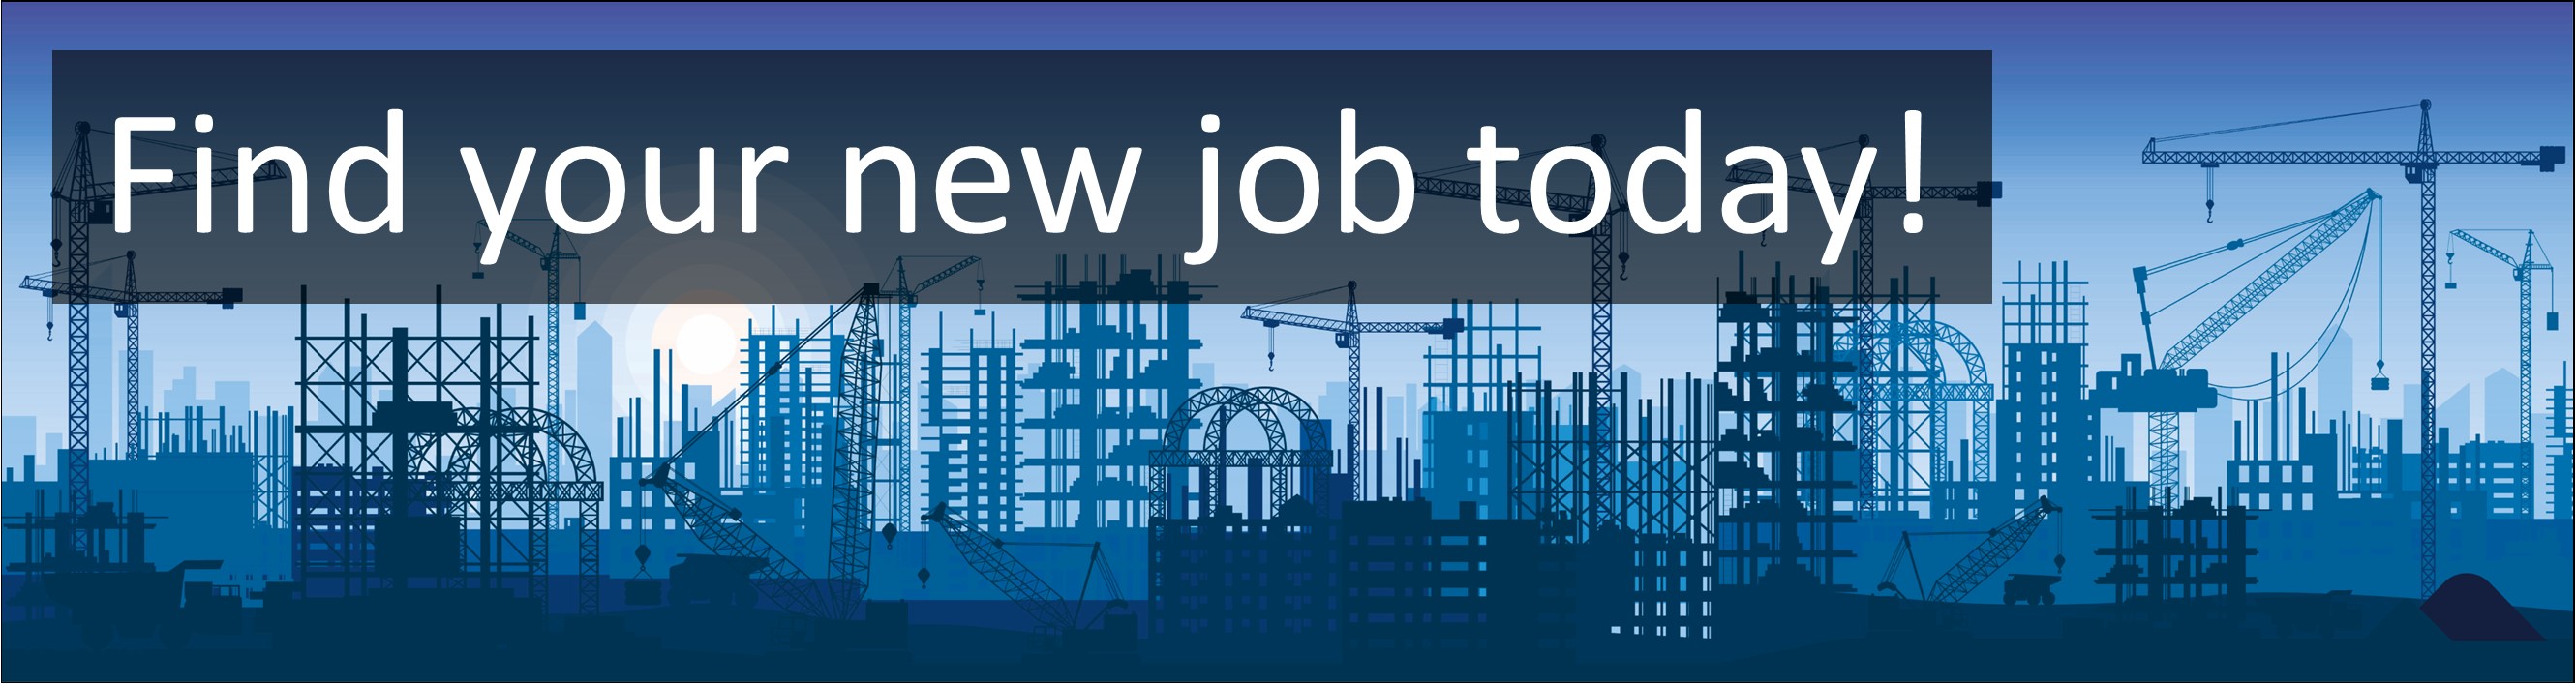 Construction & Trades Jobs. Slinger / Signaller Jobs, Careers & Vacancies in Plymouth, Devon Advertised by AWD online – Multi-Job Board Advertising and CV Sourcing Recruitment Services